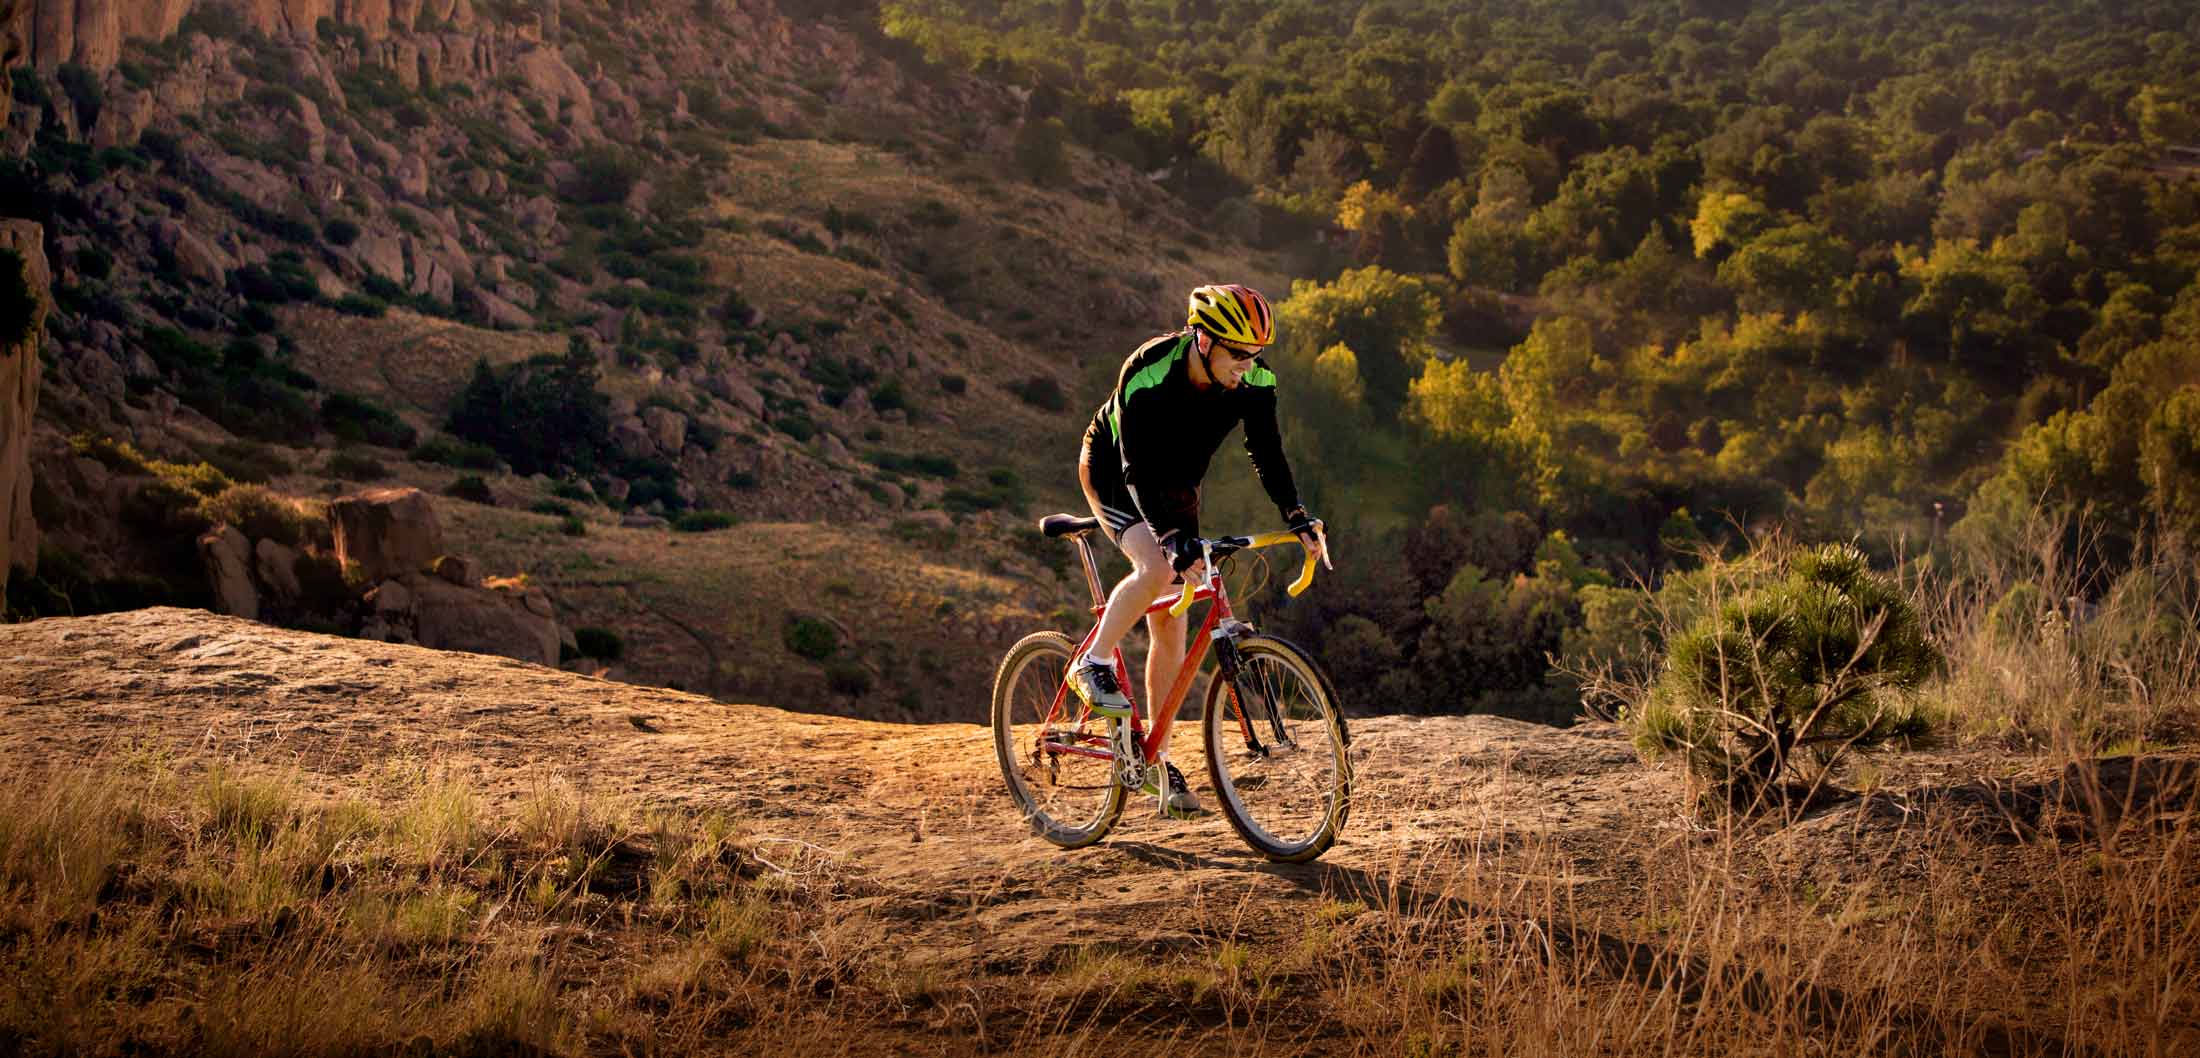 Biking in Southeast Montana: Where to Hit the Trails